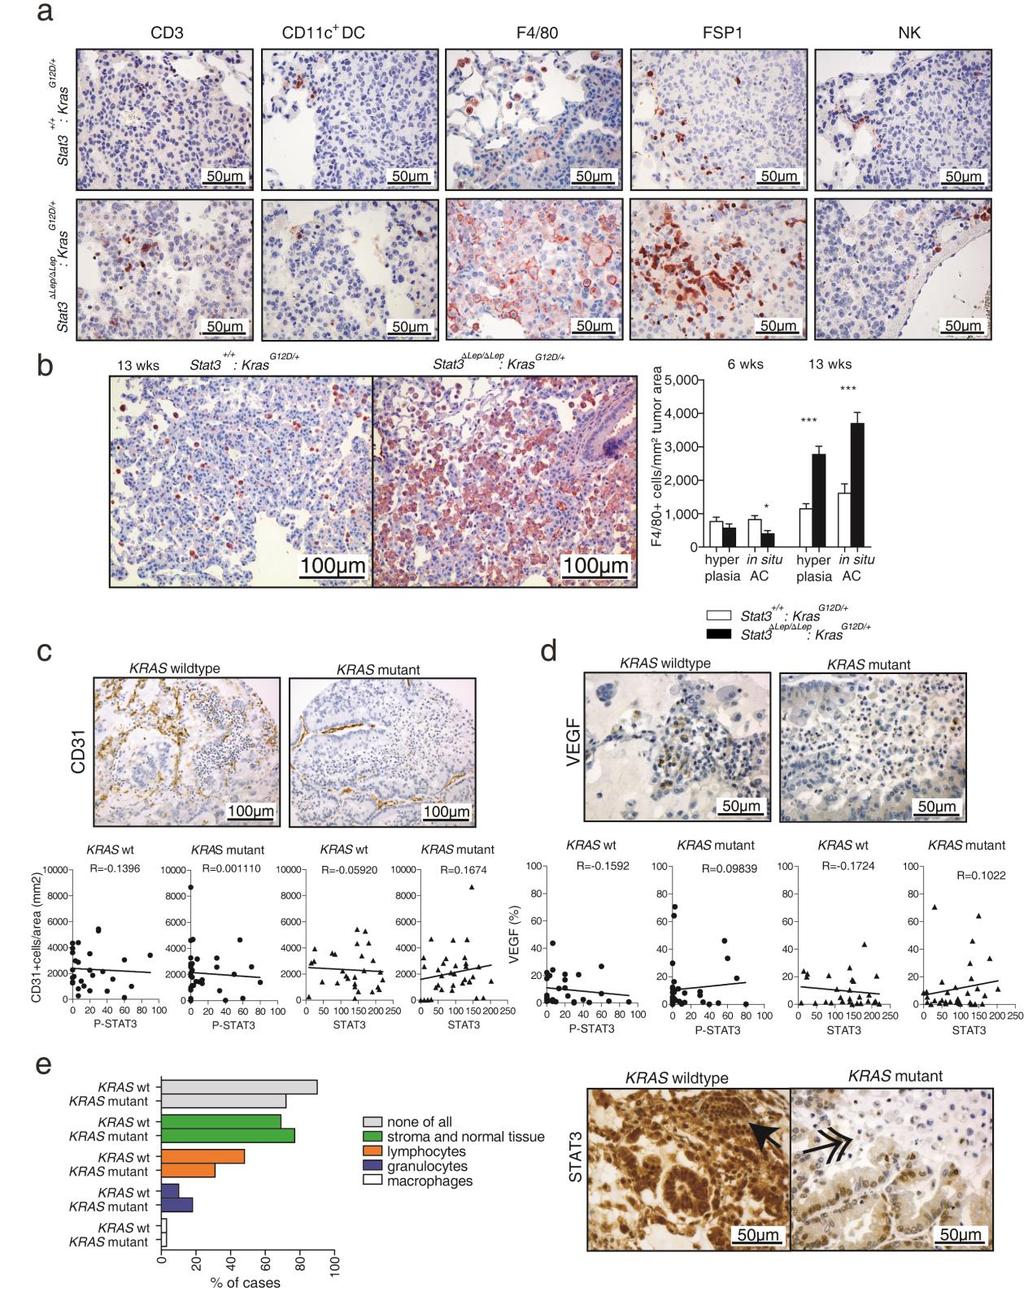 Supplementary Figure 3: STAT3 alters tumor microenvironment and angiogenesis (a) IHC pictures of CD3+ T cells, Cd11c+ dentritic cells (DC), F4/80+ macrophages, FSP1+